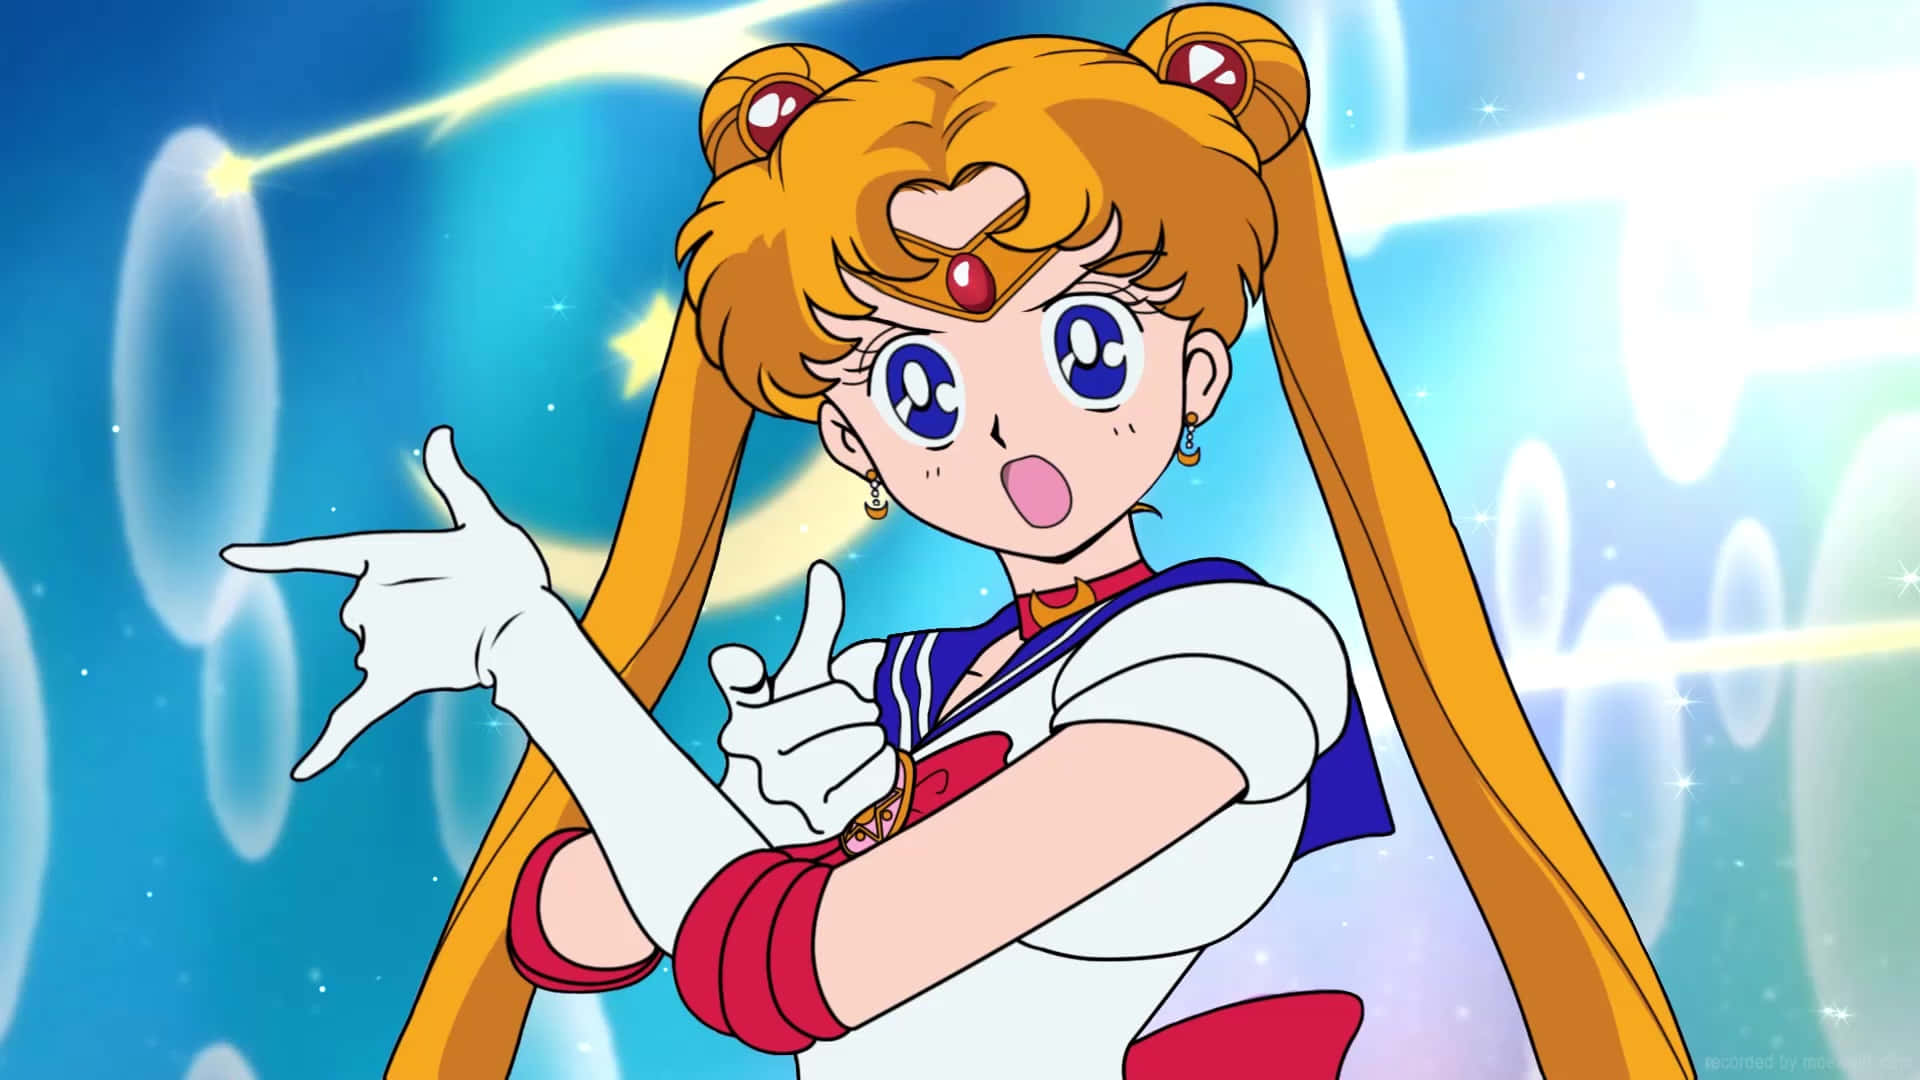 "The Endless Adventure of Sailor Moon"